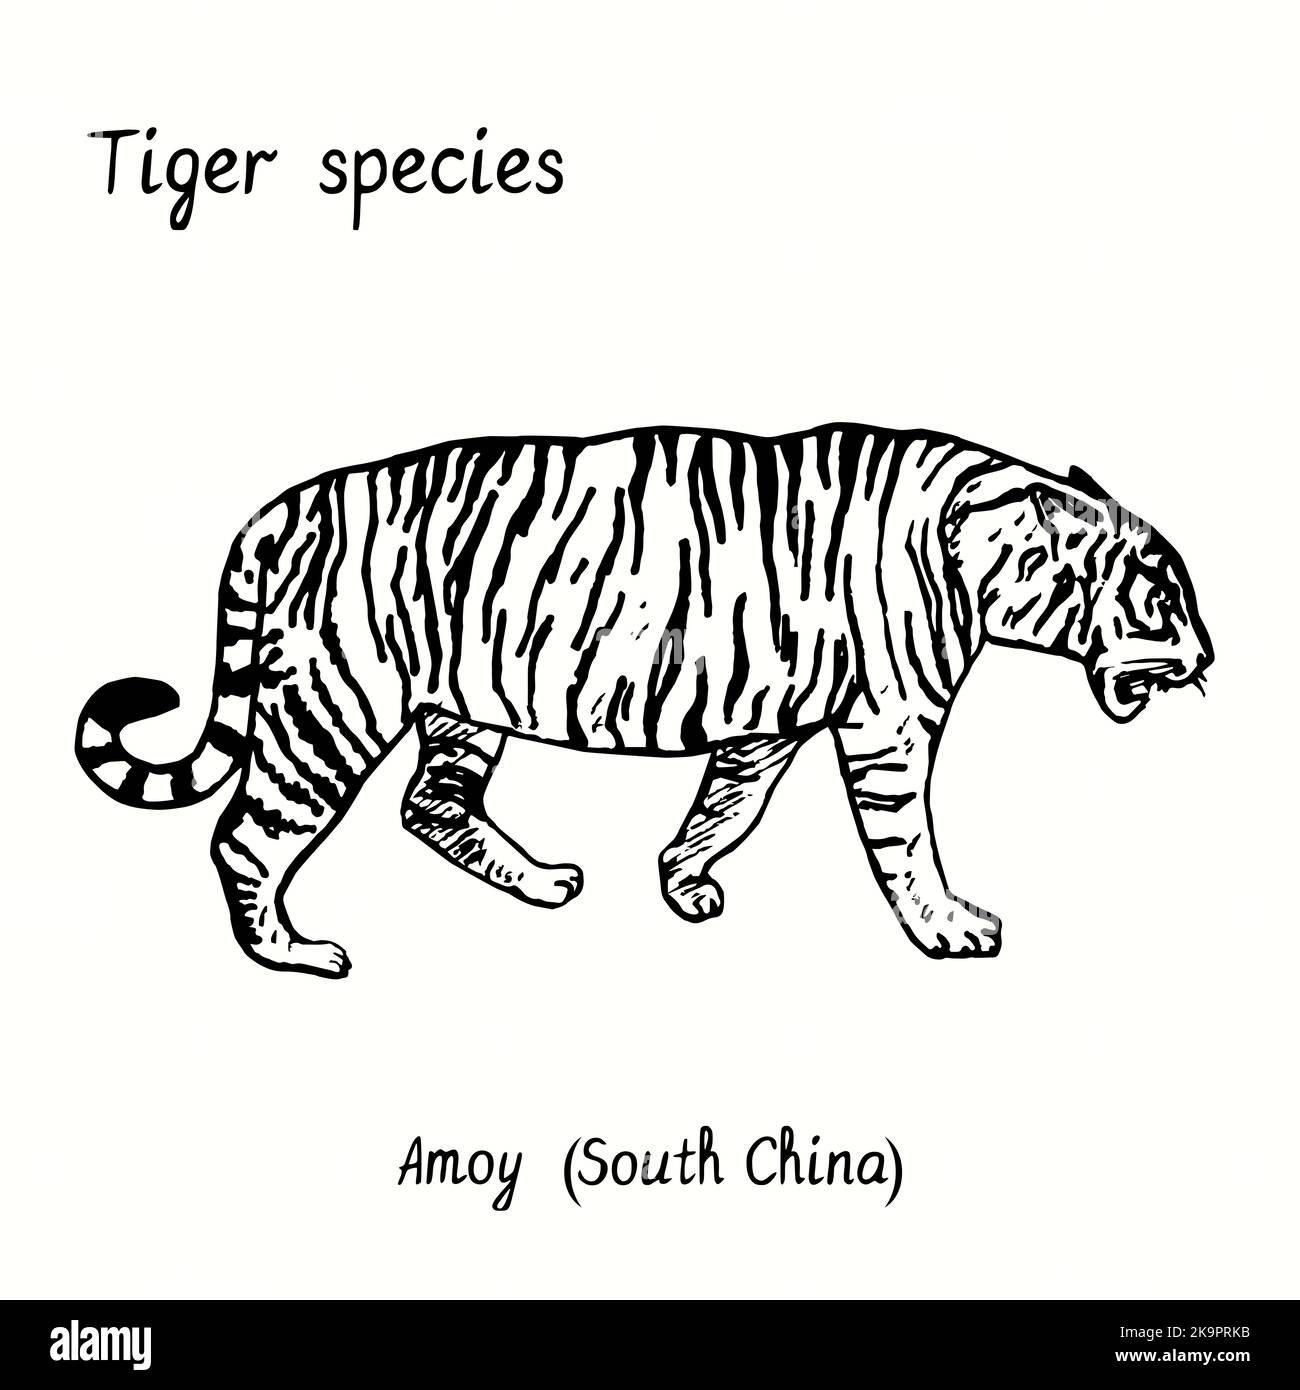 Tiger species collection, standing side view, Amoy (South China). Ink black and white doodle drawing. Stock Photo